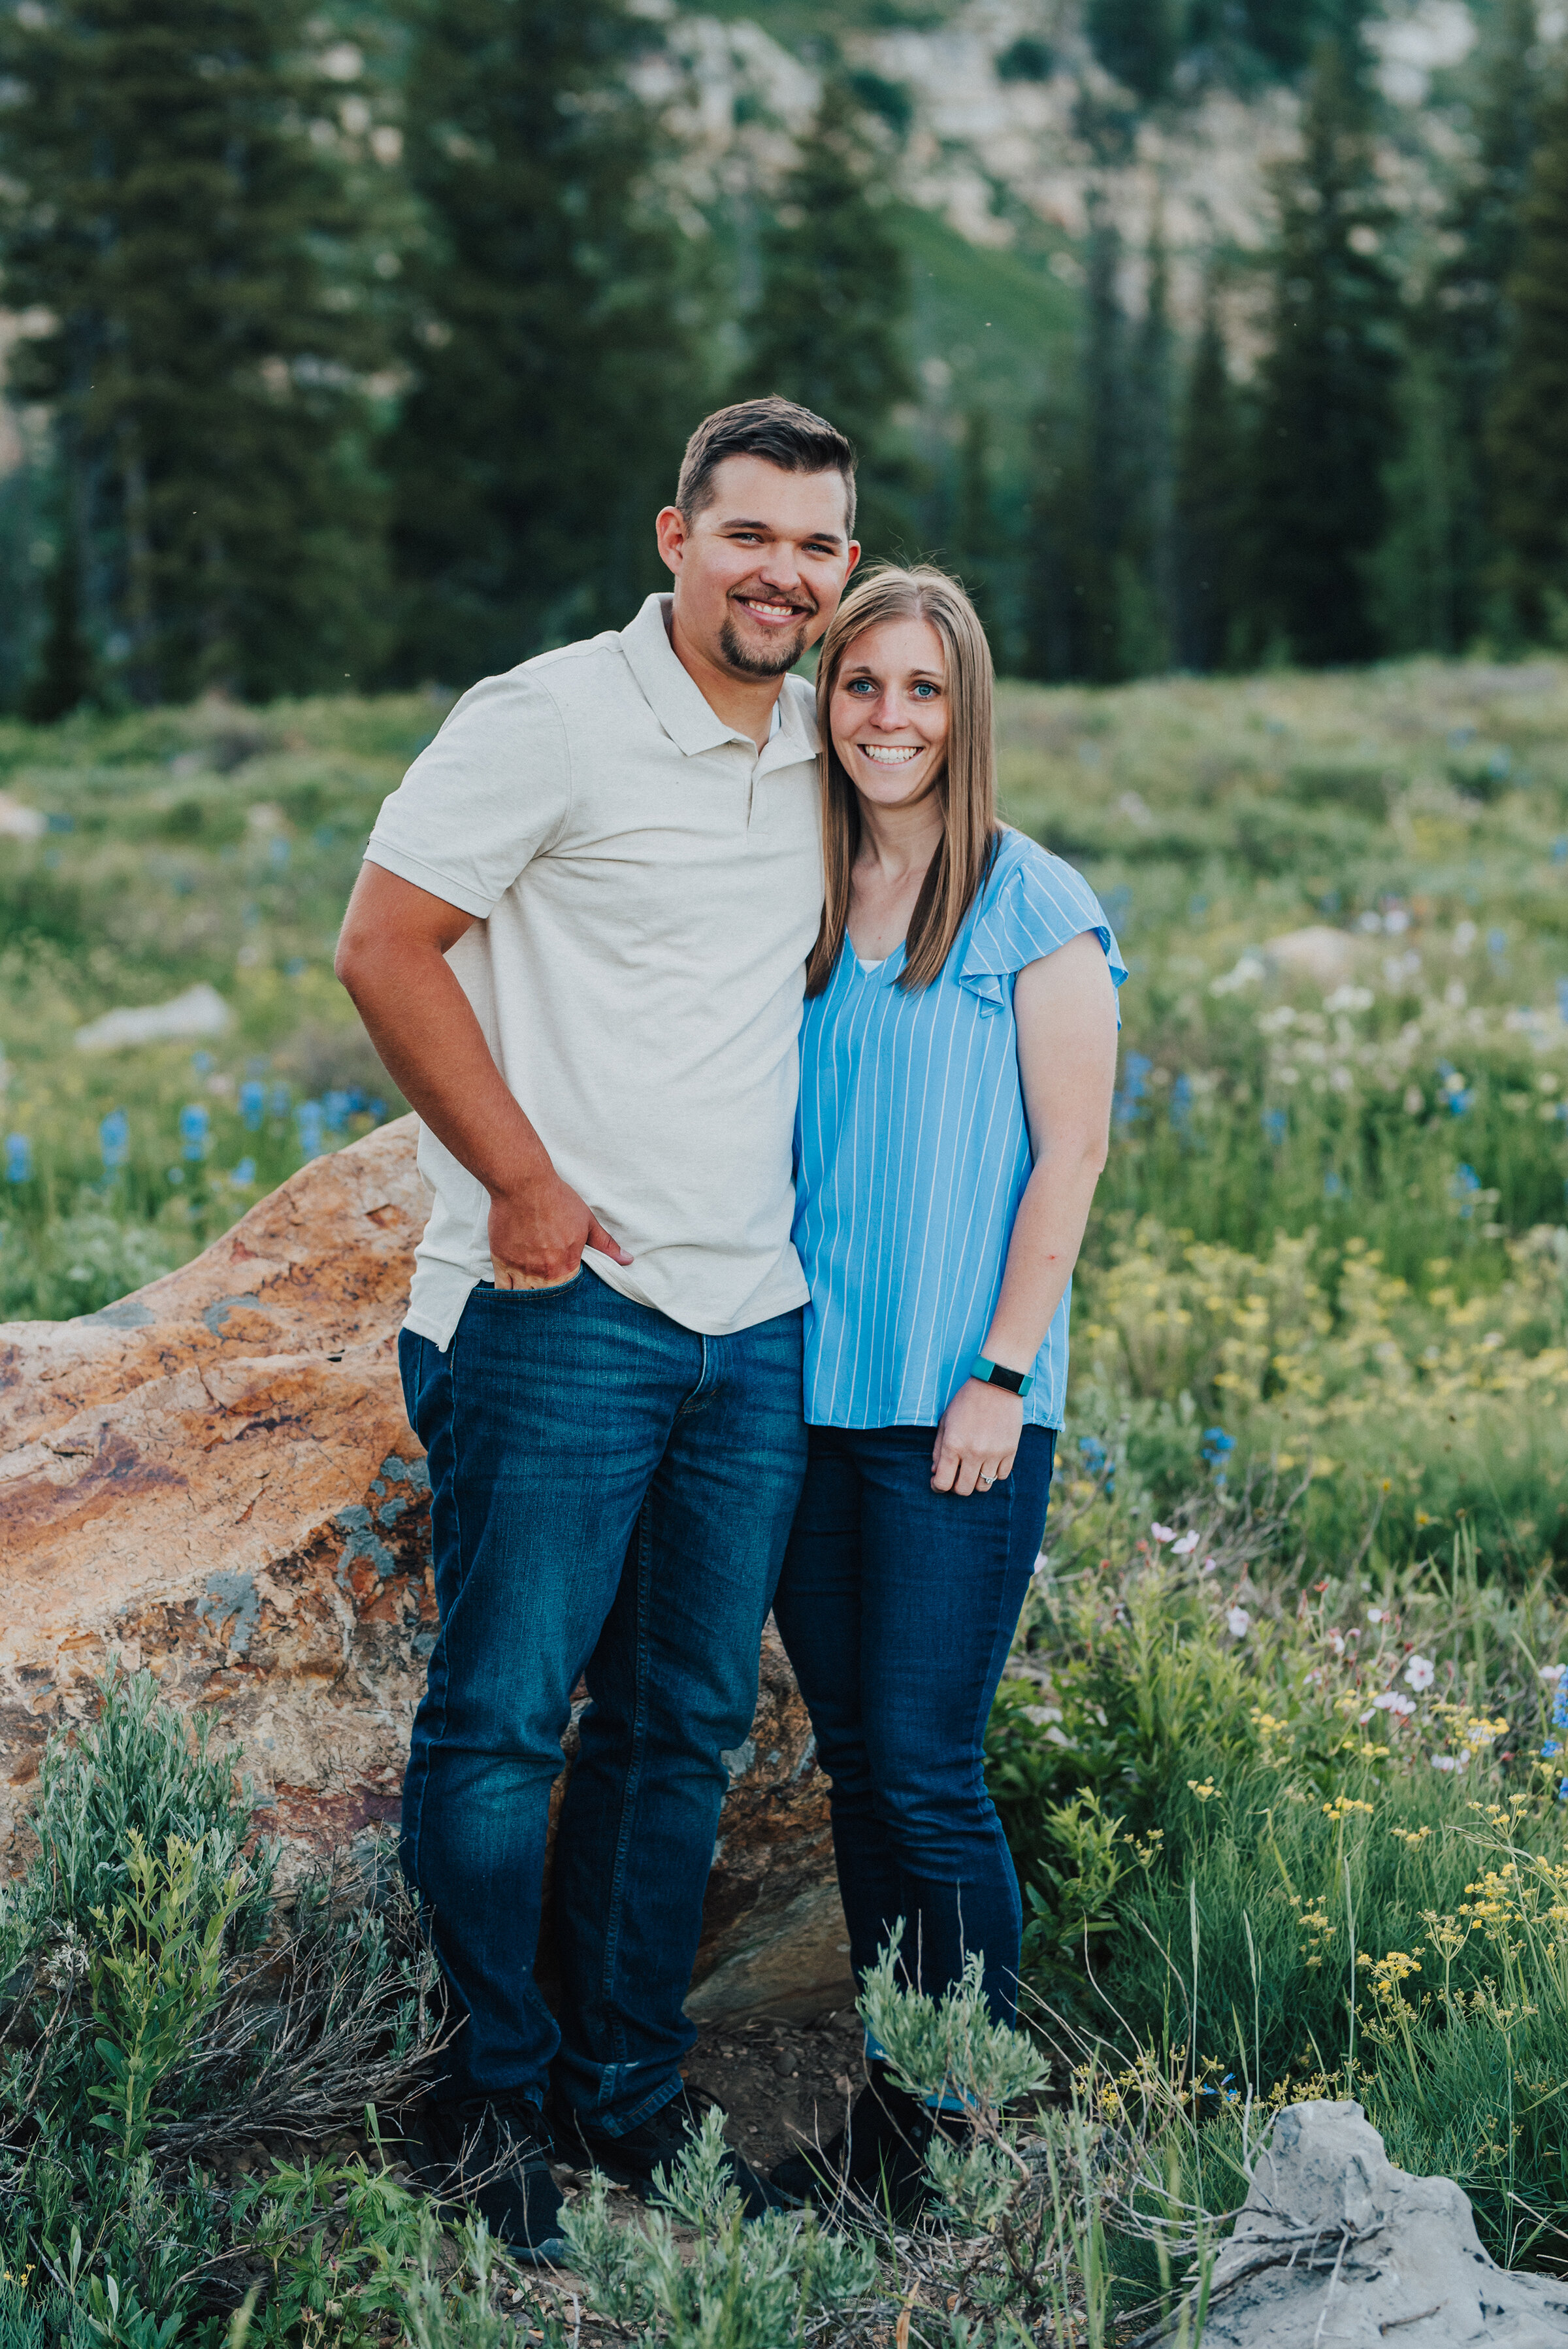  Beautiful couple in this dreamy meadow during a family photo session up Logan Canyon. Logan Utah family photographer Kristi Alyse photography Tony Grove forest nature photos Logan canyon light blue family photos wild flowers grand parents children parents spouses reunited dreamy scenic photo shoot #kristialysephotography #utahphotographer #familyphotography #logancanyon #familyphotos #forest #wildflowers #northernutah #familyportraits #family 